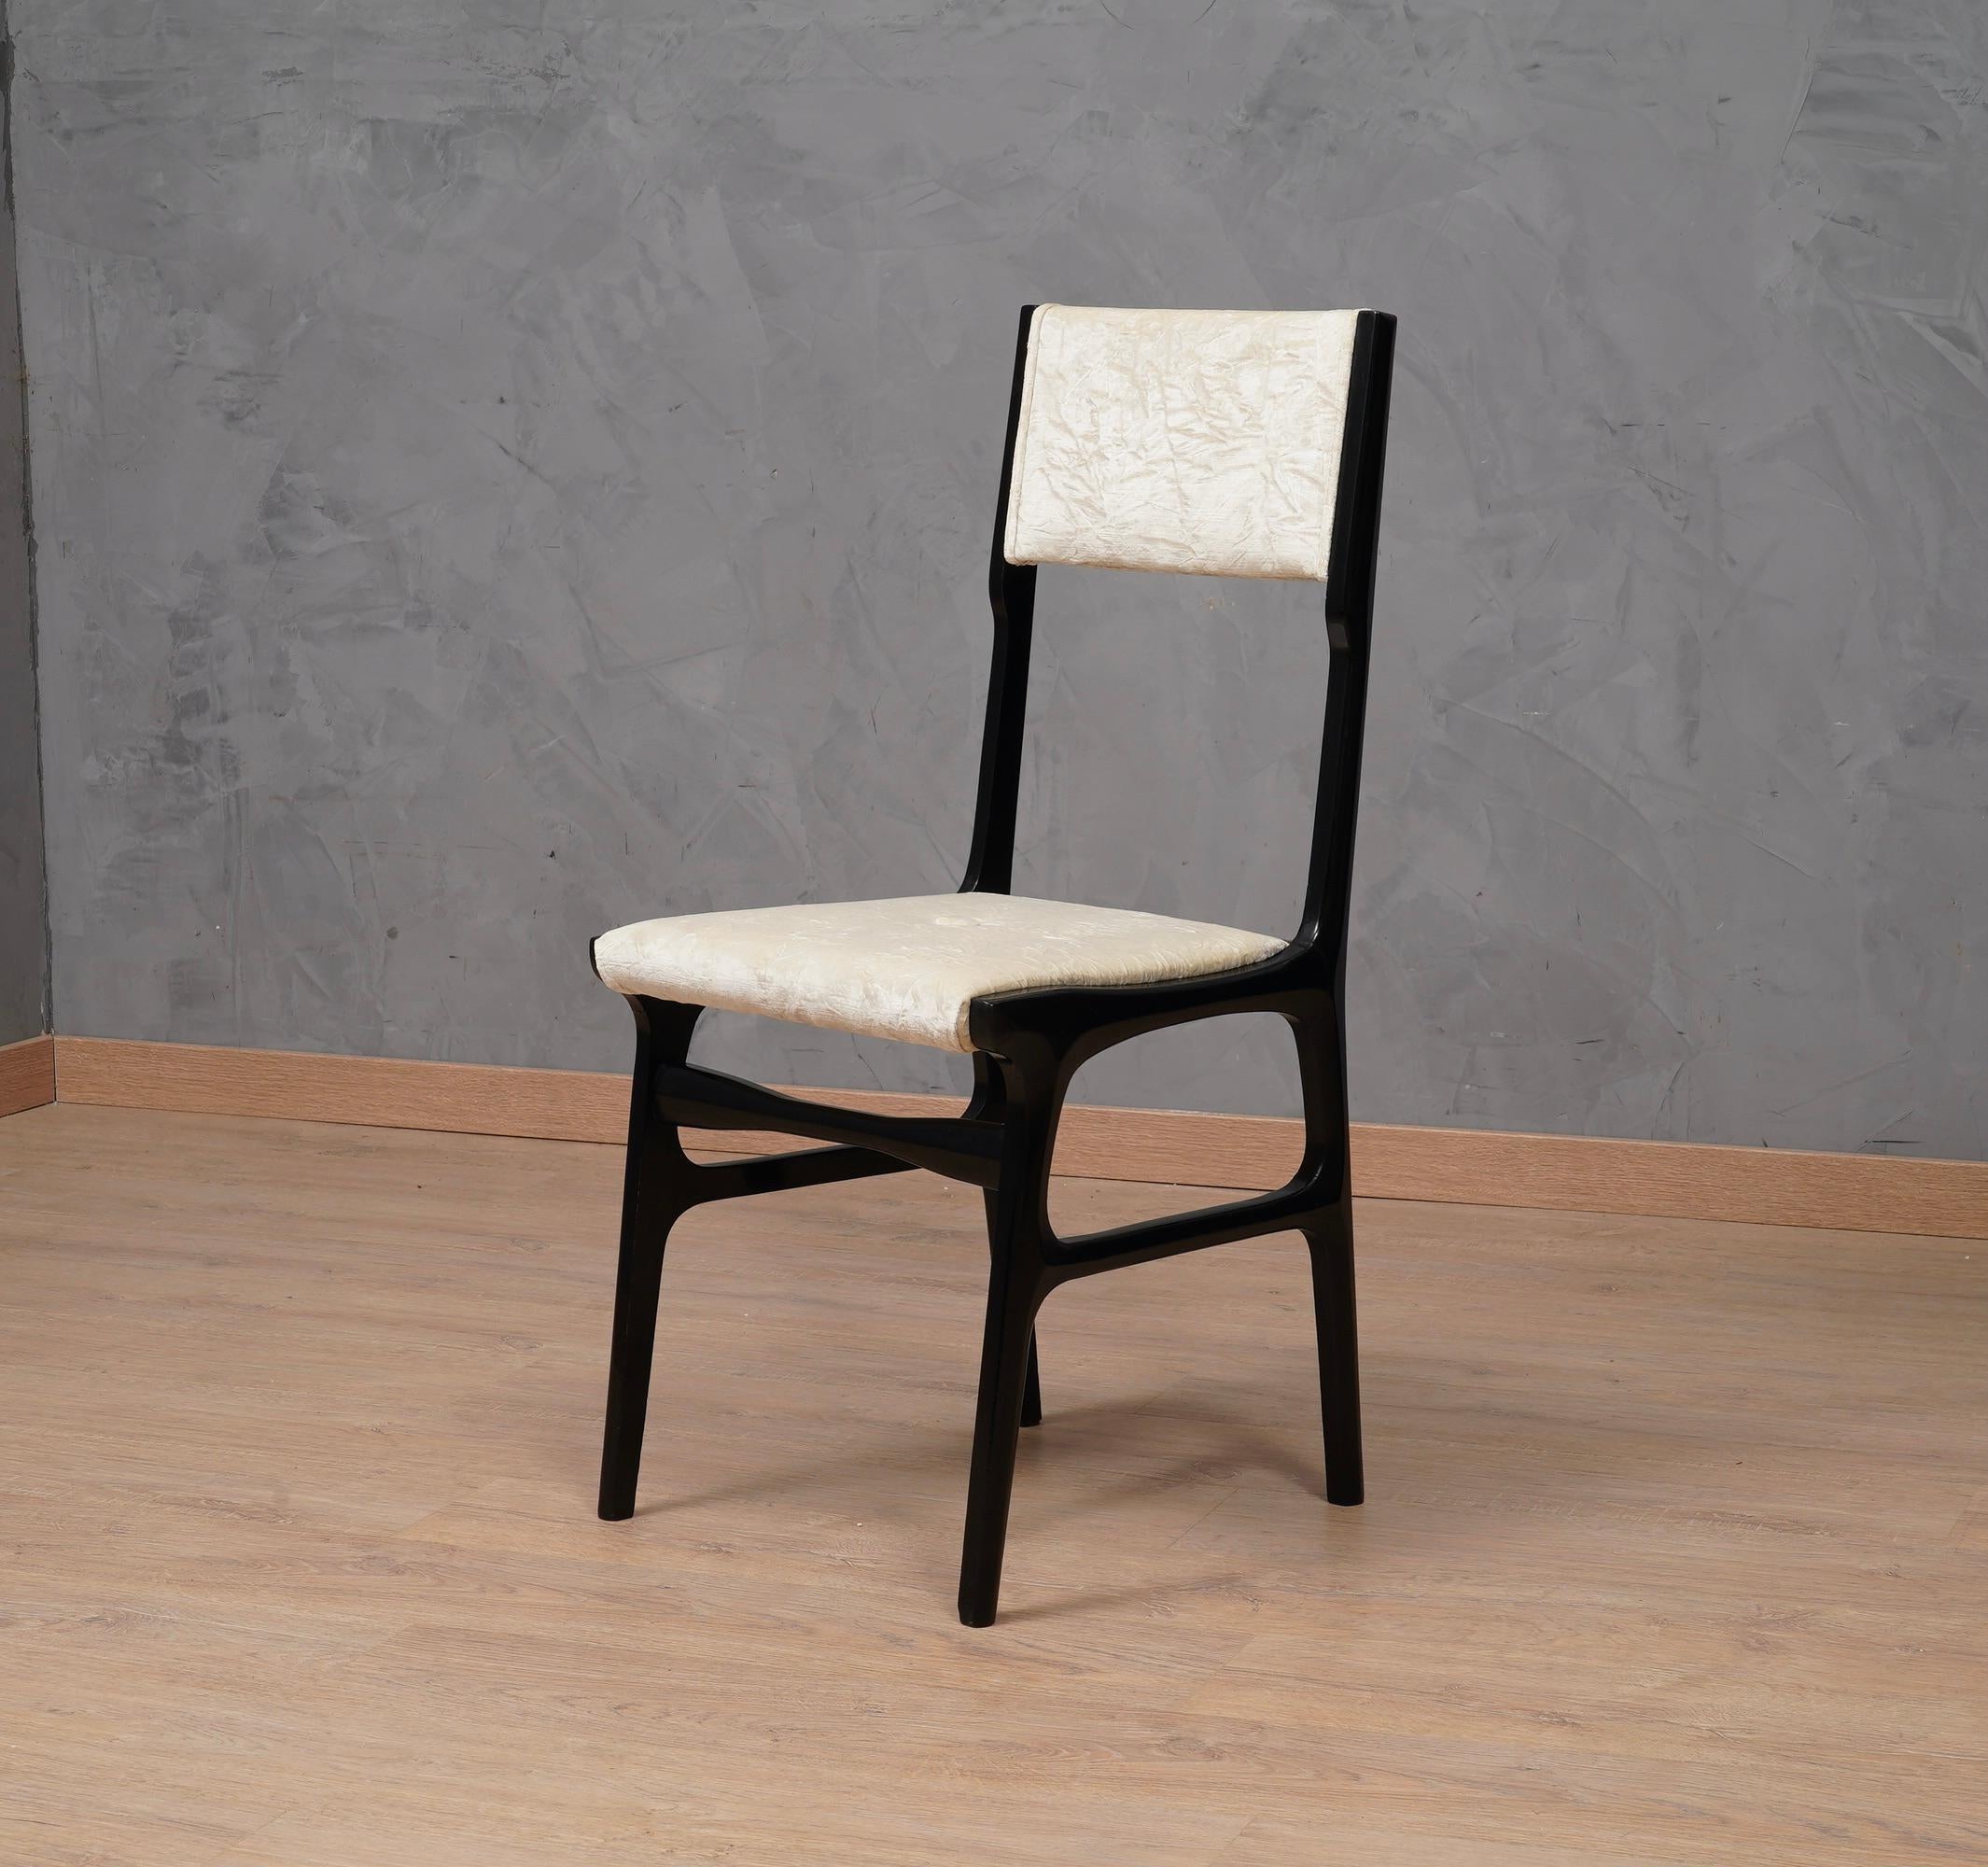 Six chairs attributed to Carlo de Carli 1955, recognizable by their very special design, in the rigorous style of Carlo De Carli.

All in wood polished in black shellac. The backrest and the seat have been upholstered in crumpled white velvet. Its